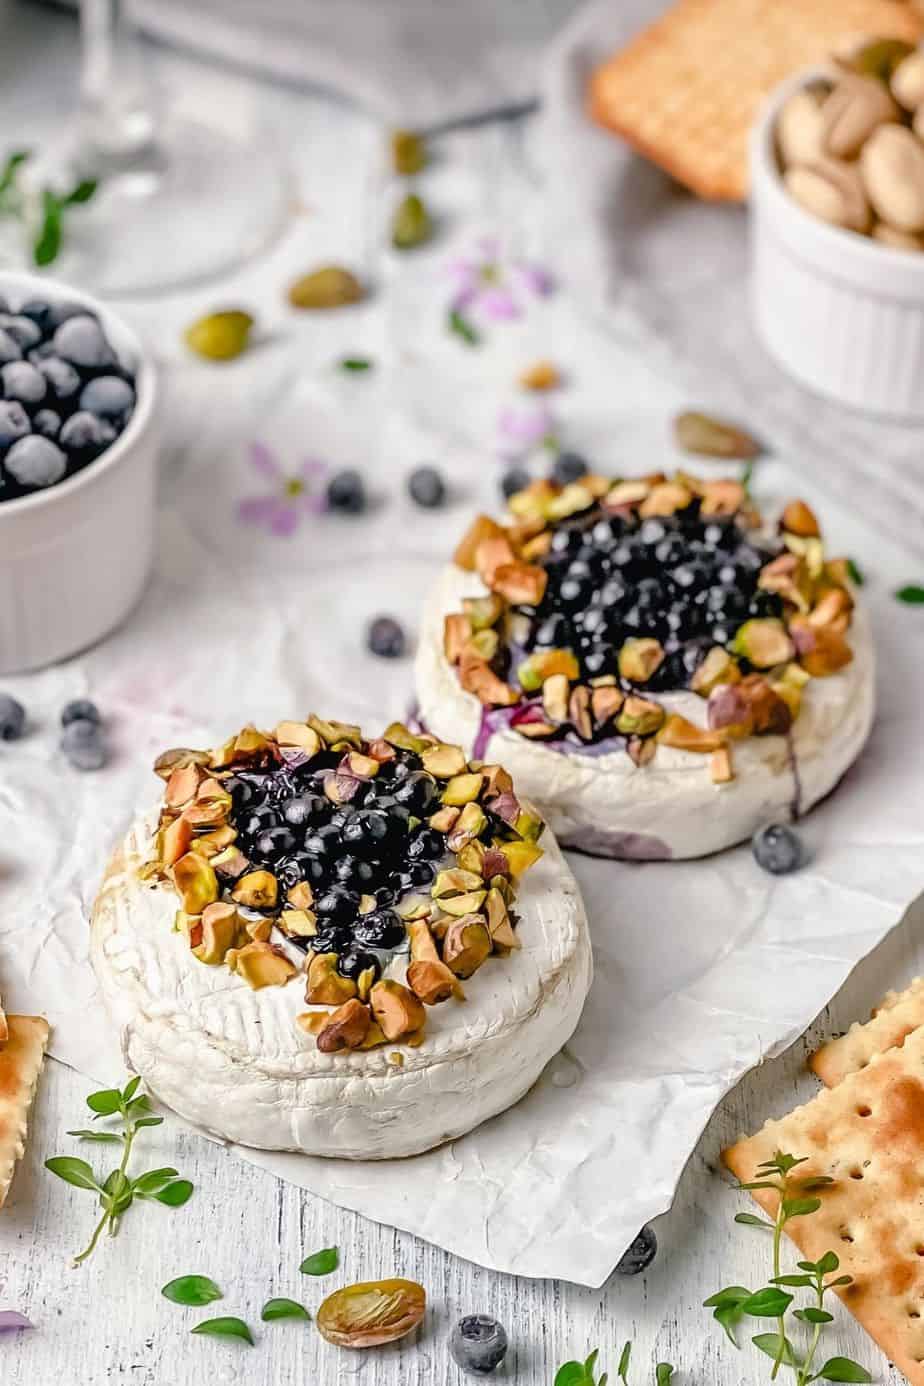 Easiest baked camembert recipe EVER! Camembert cheese topped with thyme sprigs, honey, blueberries and baked until melty perfection. Delicious! The Yummy Bowl